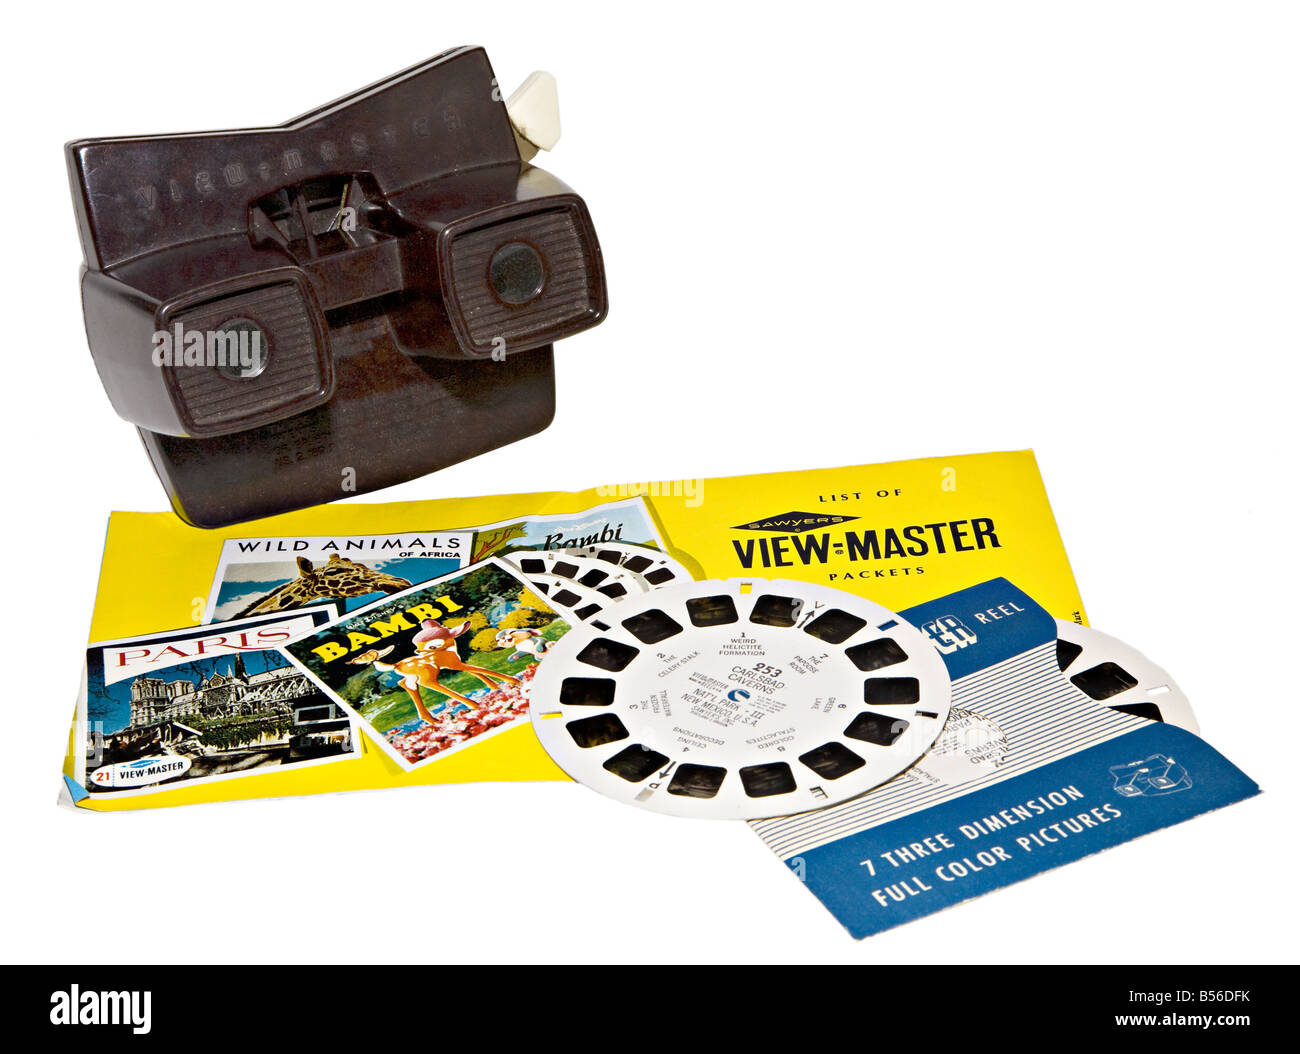 View-Master 3D bakalite viewer Model E produced from 1955 in Belgium with advertising sheet and reels Stock Photo